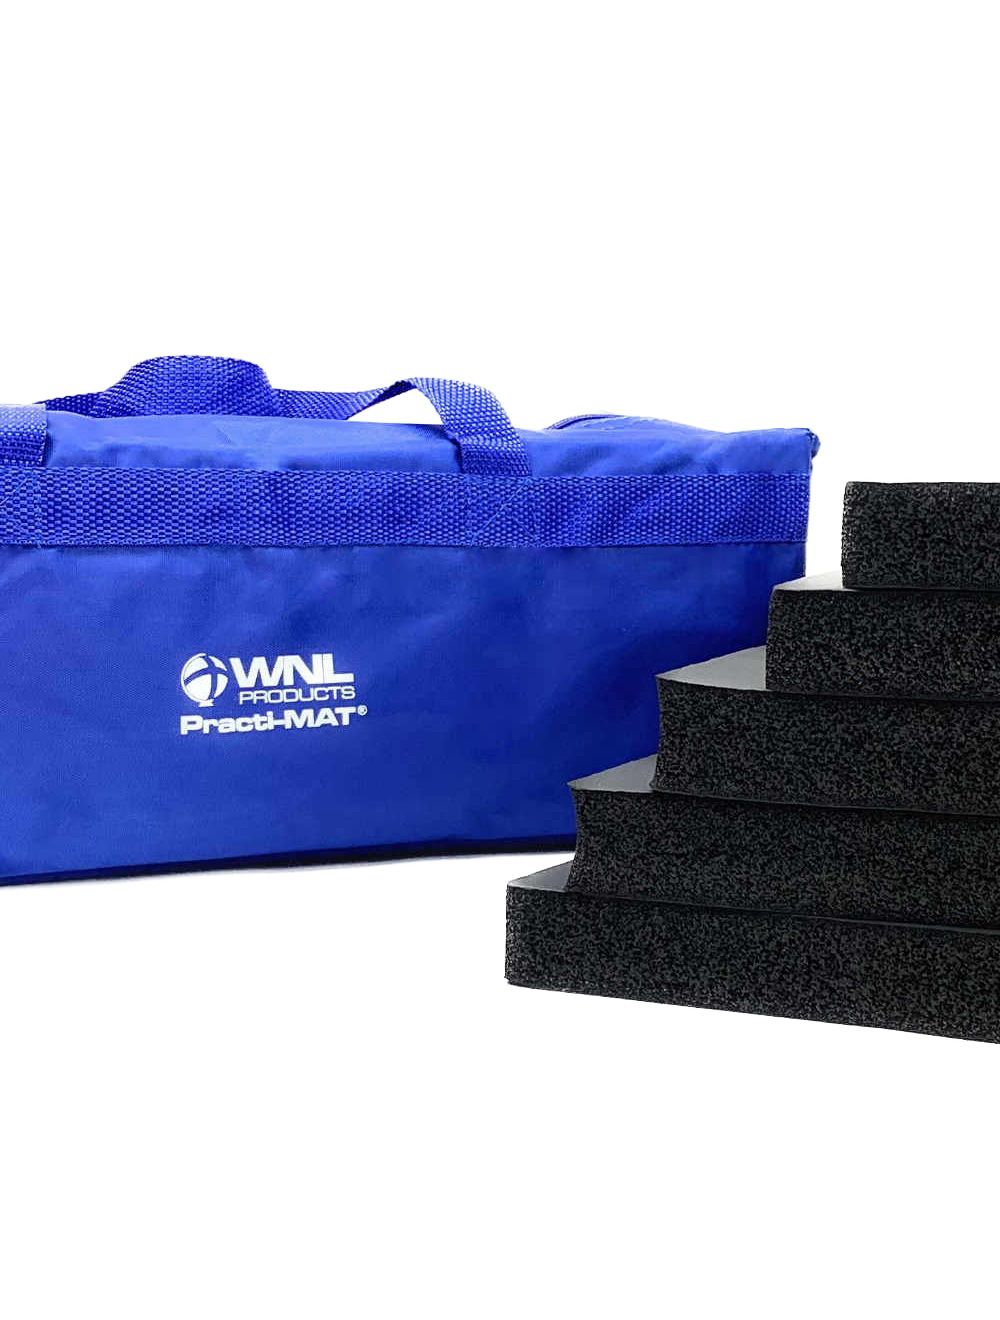 Foam kneeling pads for less strain on the knees and back during CPR training